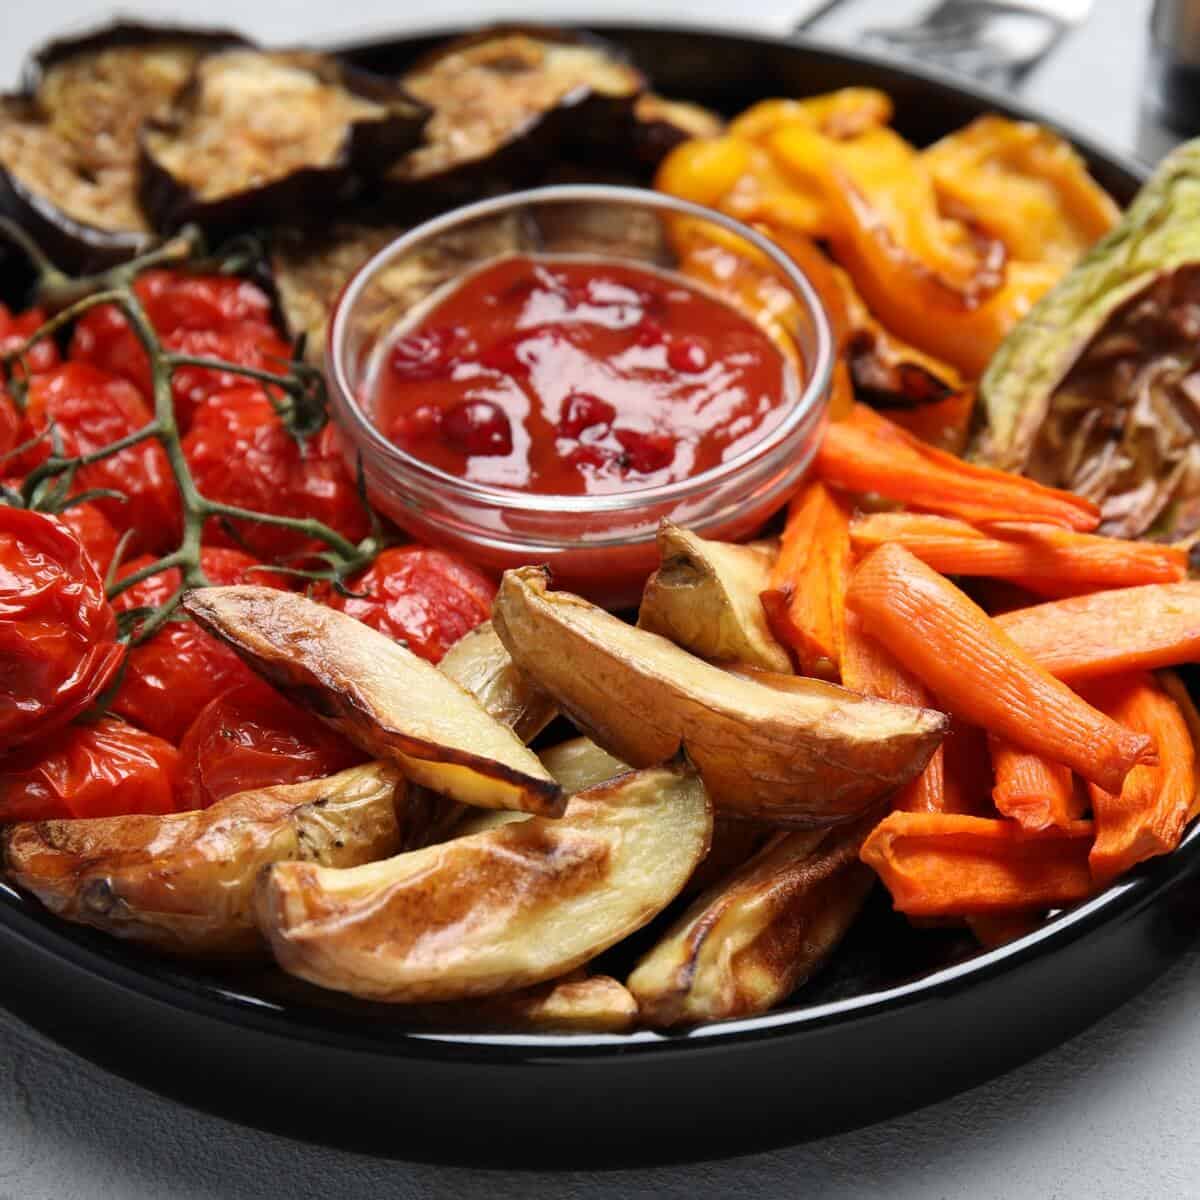 roasted vegetables on a black platter with red sauce